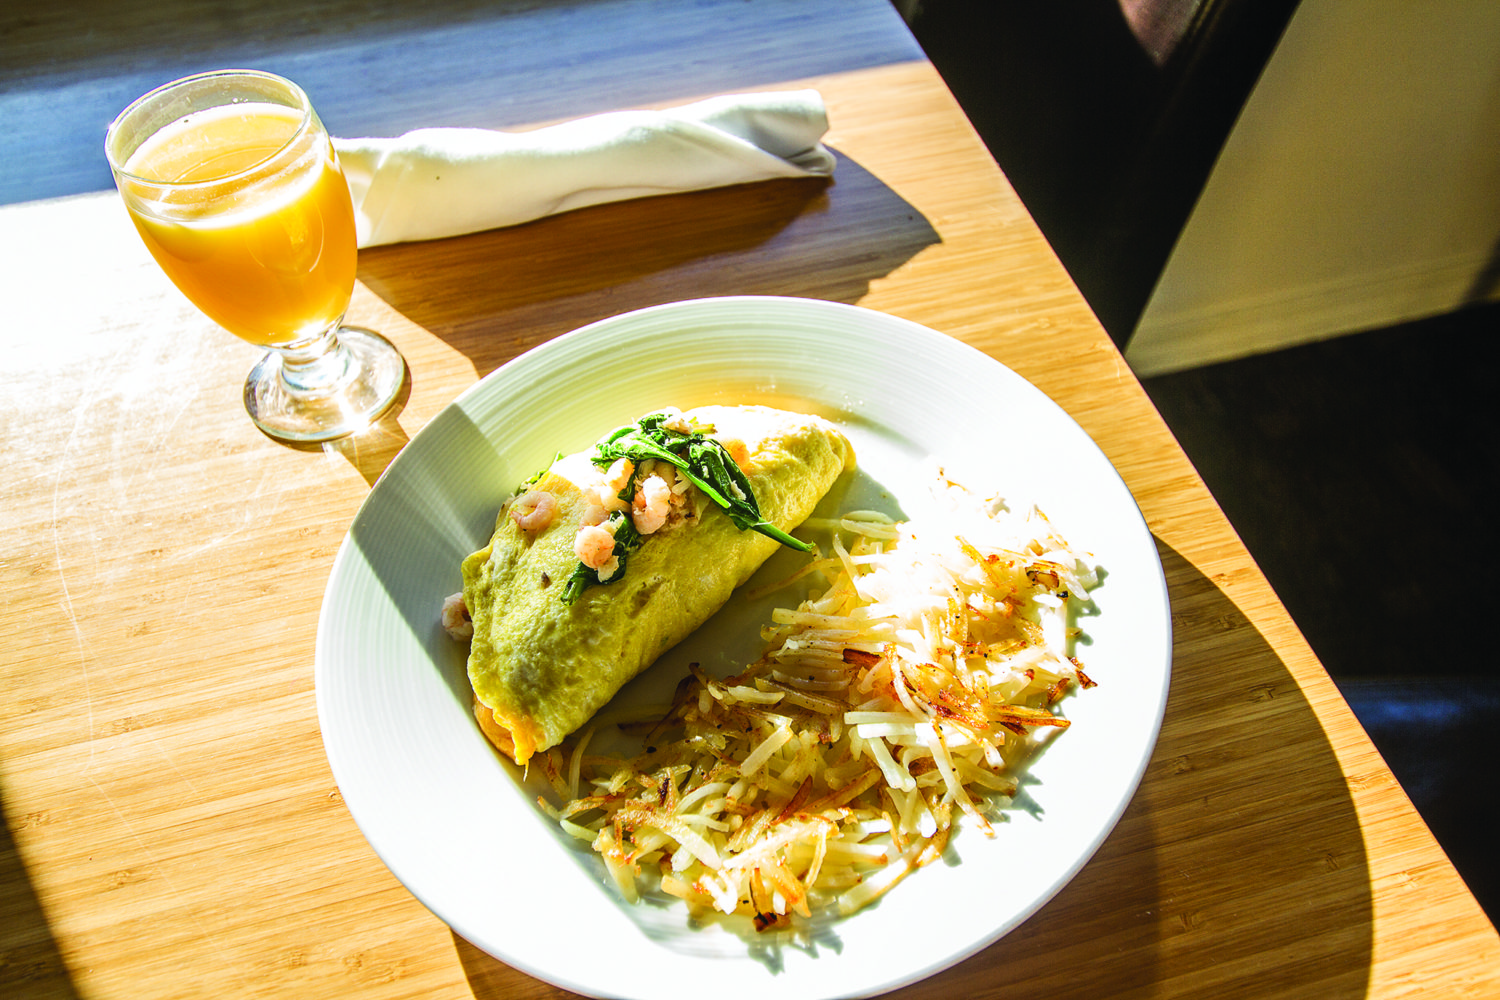 Shoalwater omelet features local Dungeness crab, bay shriimp, cheddar cheese and spinach